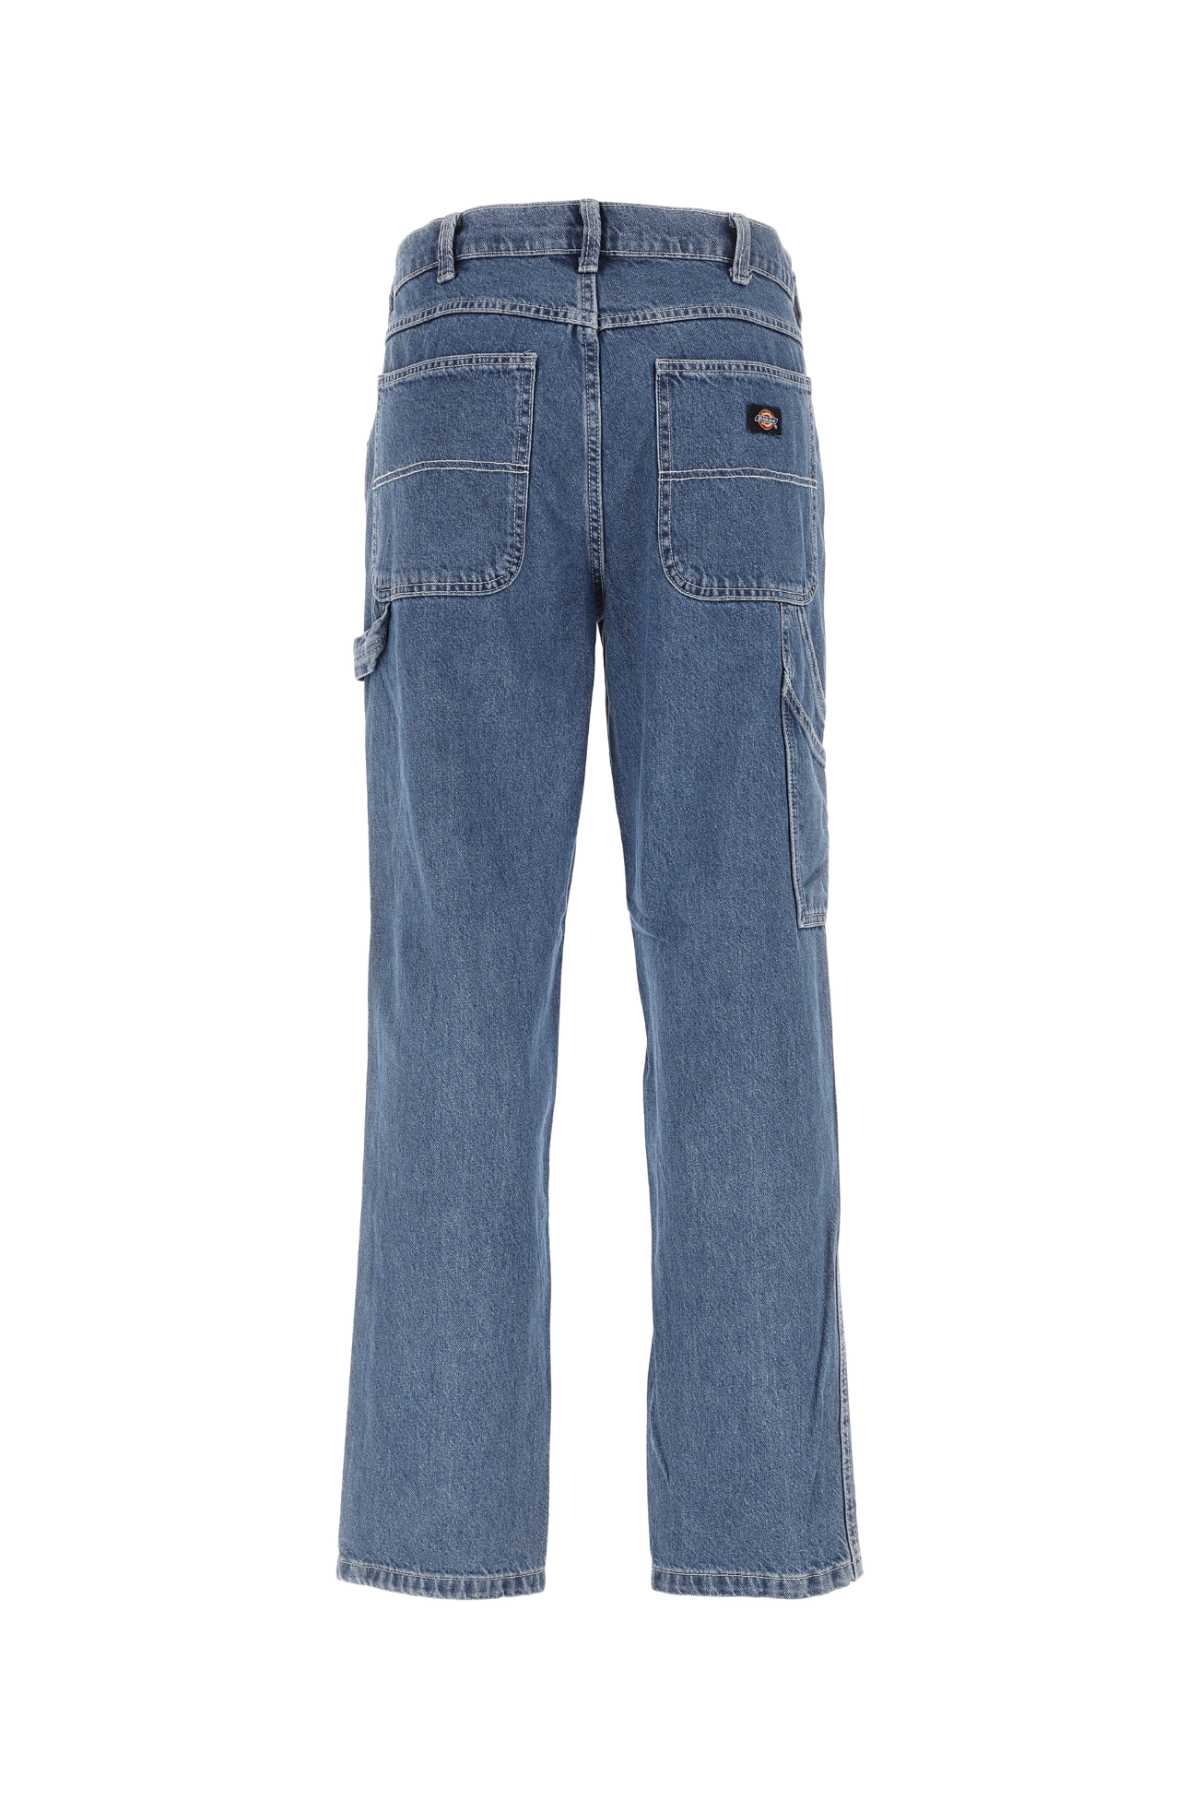 Shop Dickies Denim Jeans In Classicblue